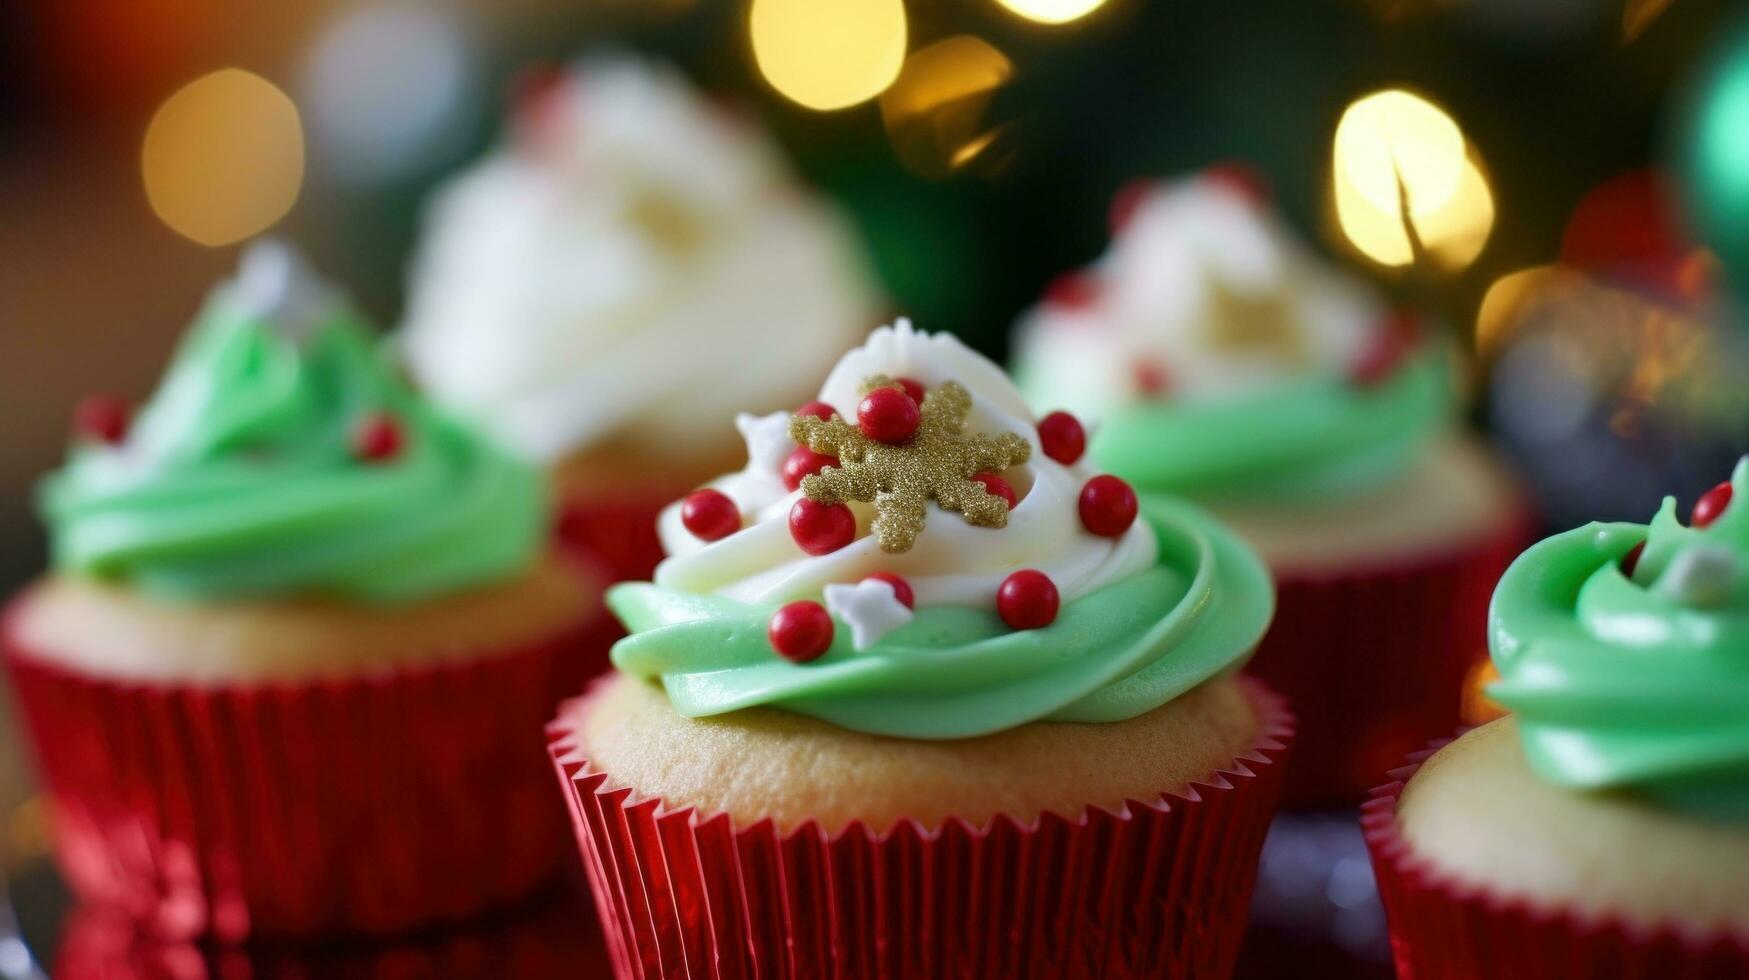 AI generated beautifully decorated cupcakes with festive red and green icing and edible Christmas decorations photo